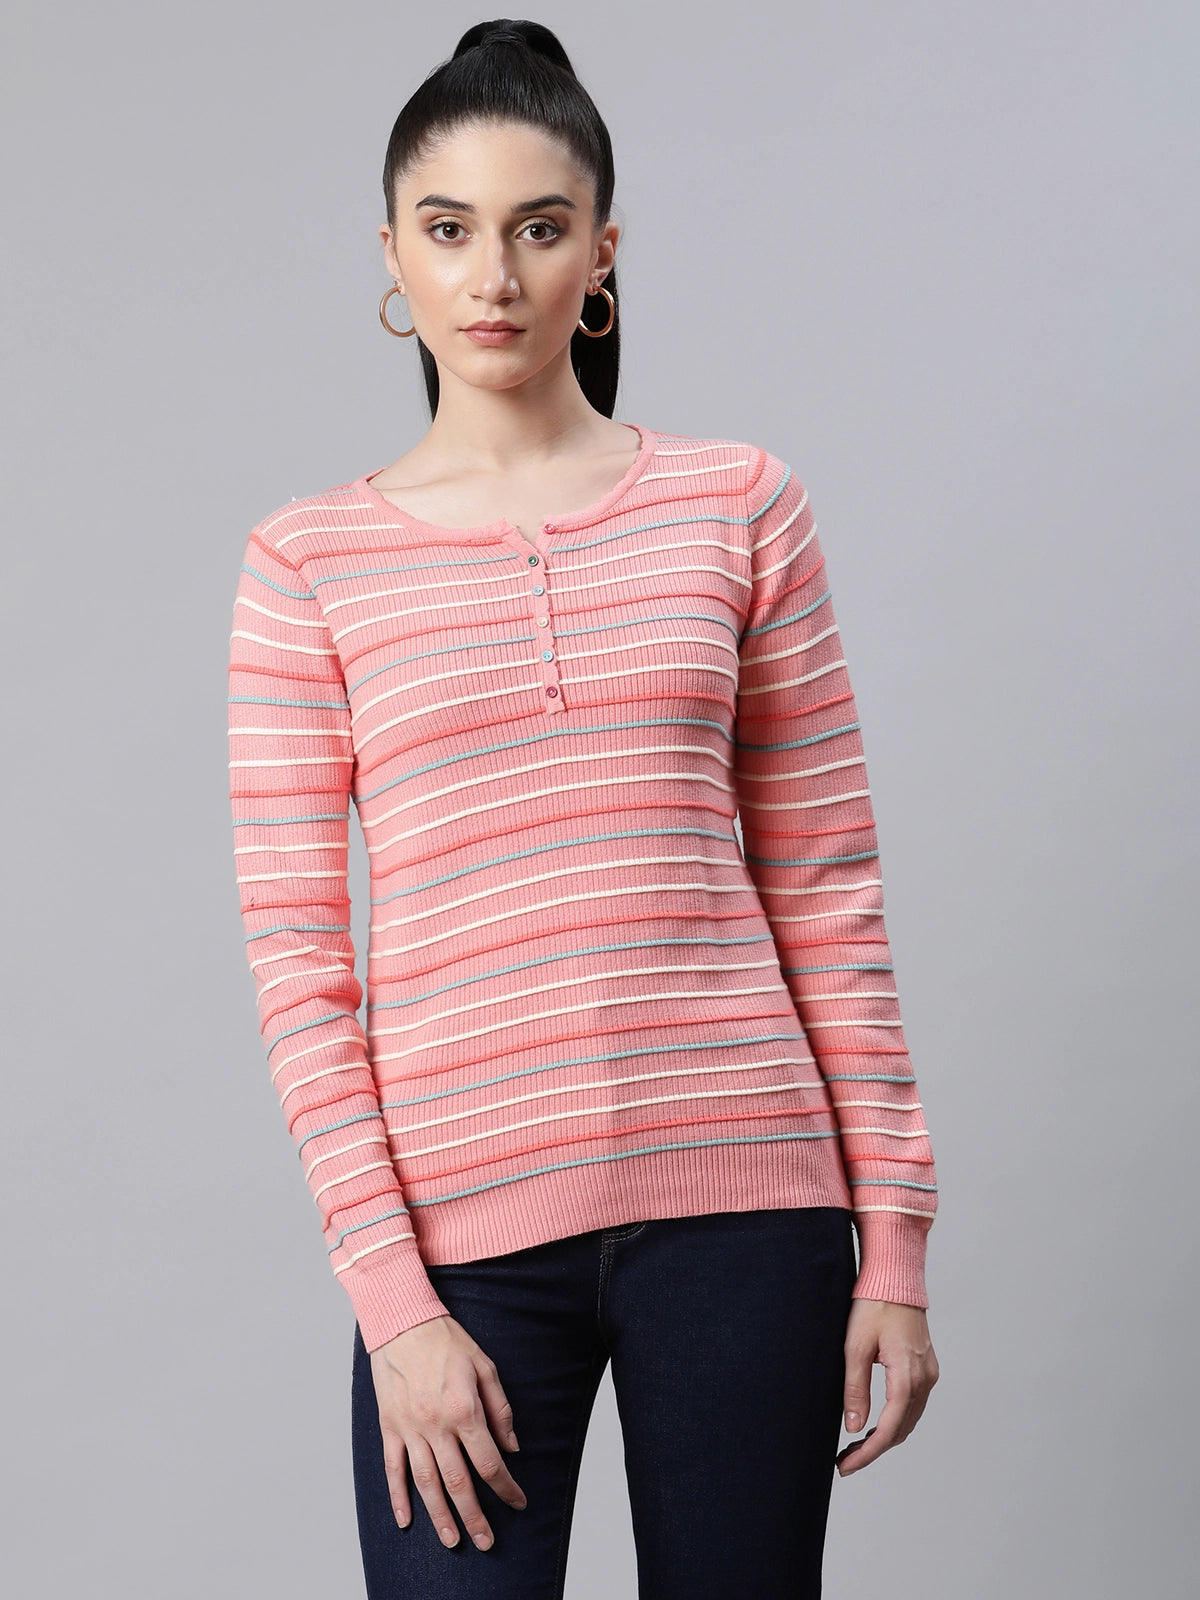 Buy New Design Jacquard Pink Casual Pullover